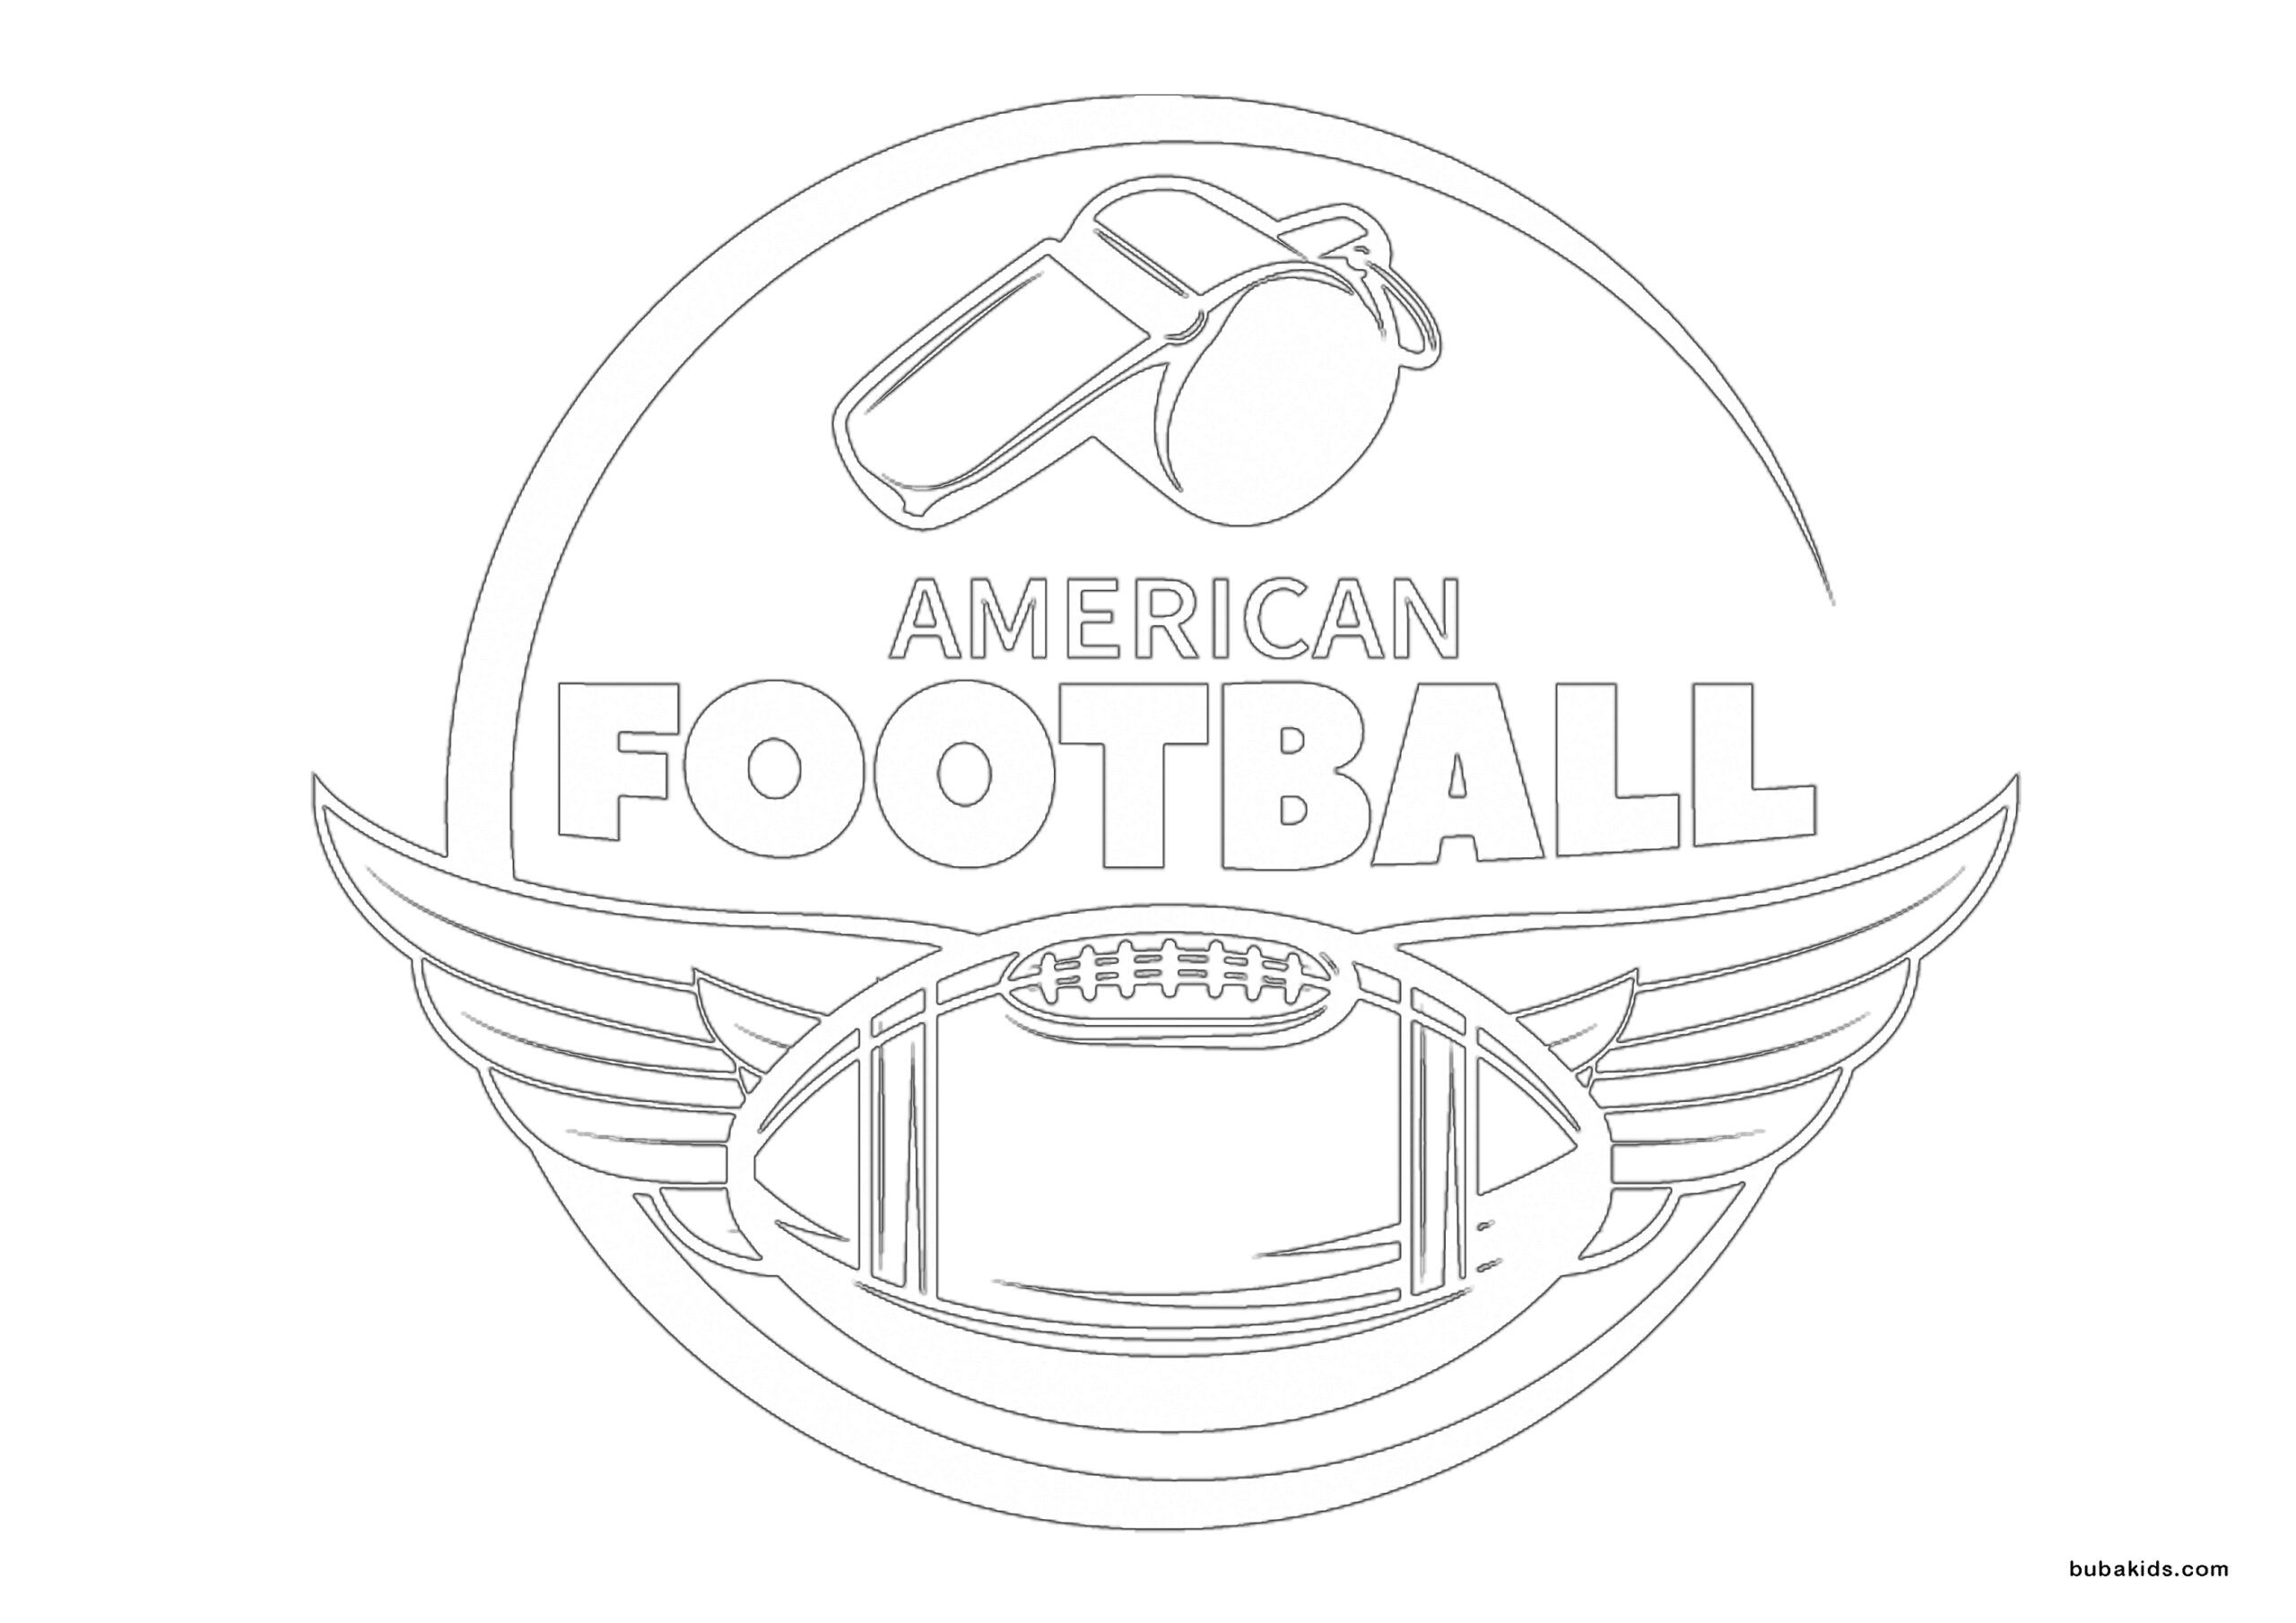 American football 2022 coloring page